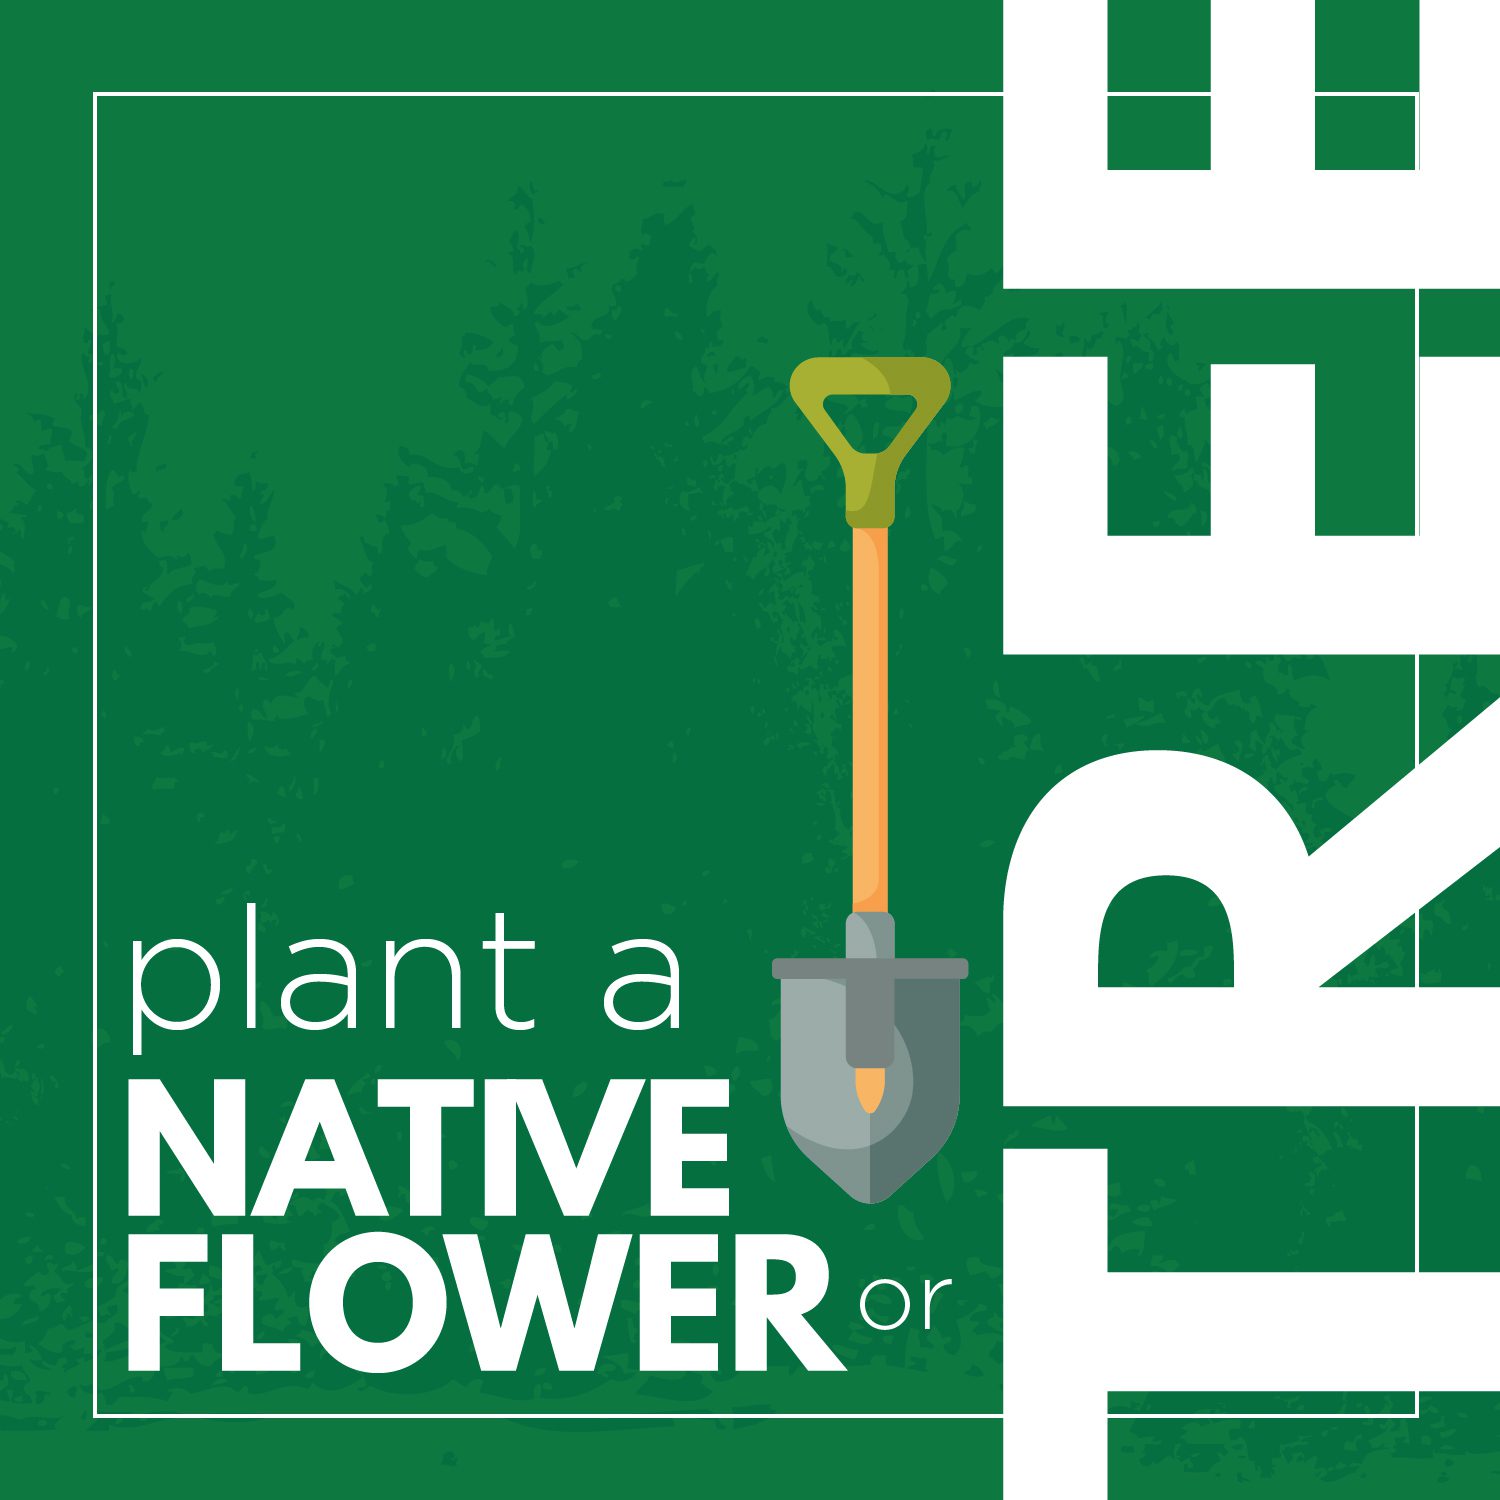 Plant a native flower or tree